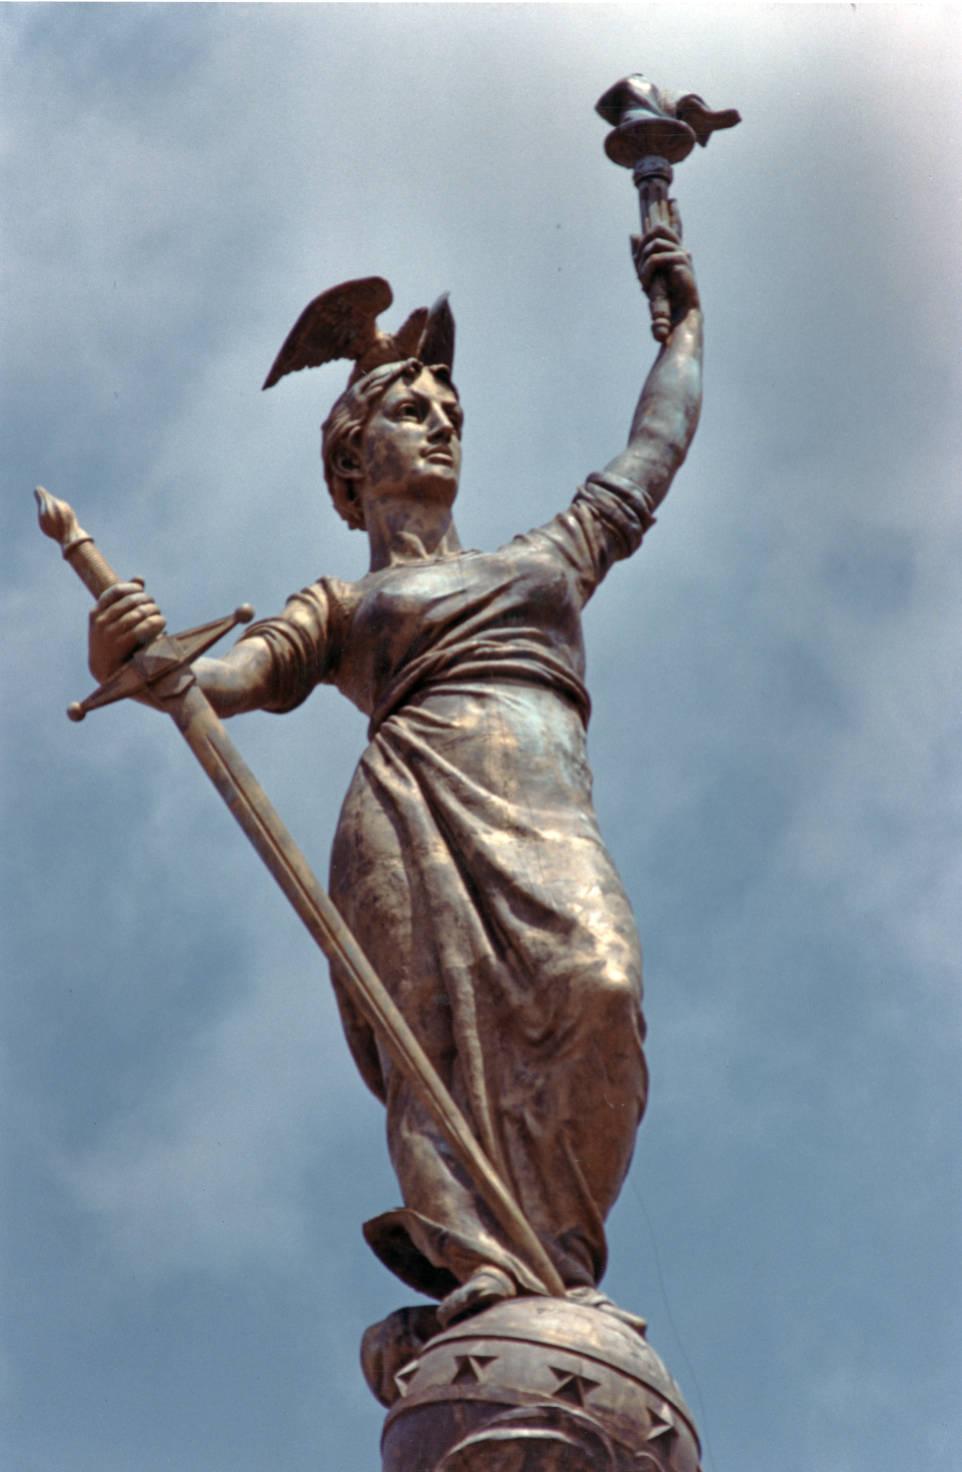 A bronze statue of a woman holding a large sword in one hand and a torch in the other. A bronze bird is perched on her head.